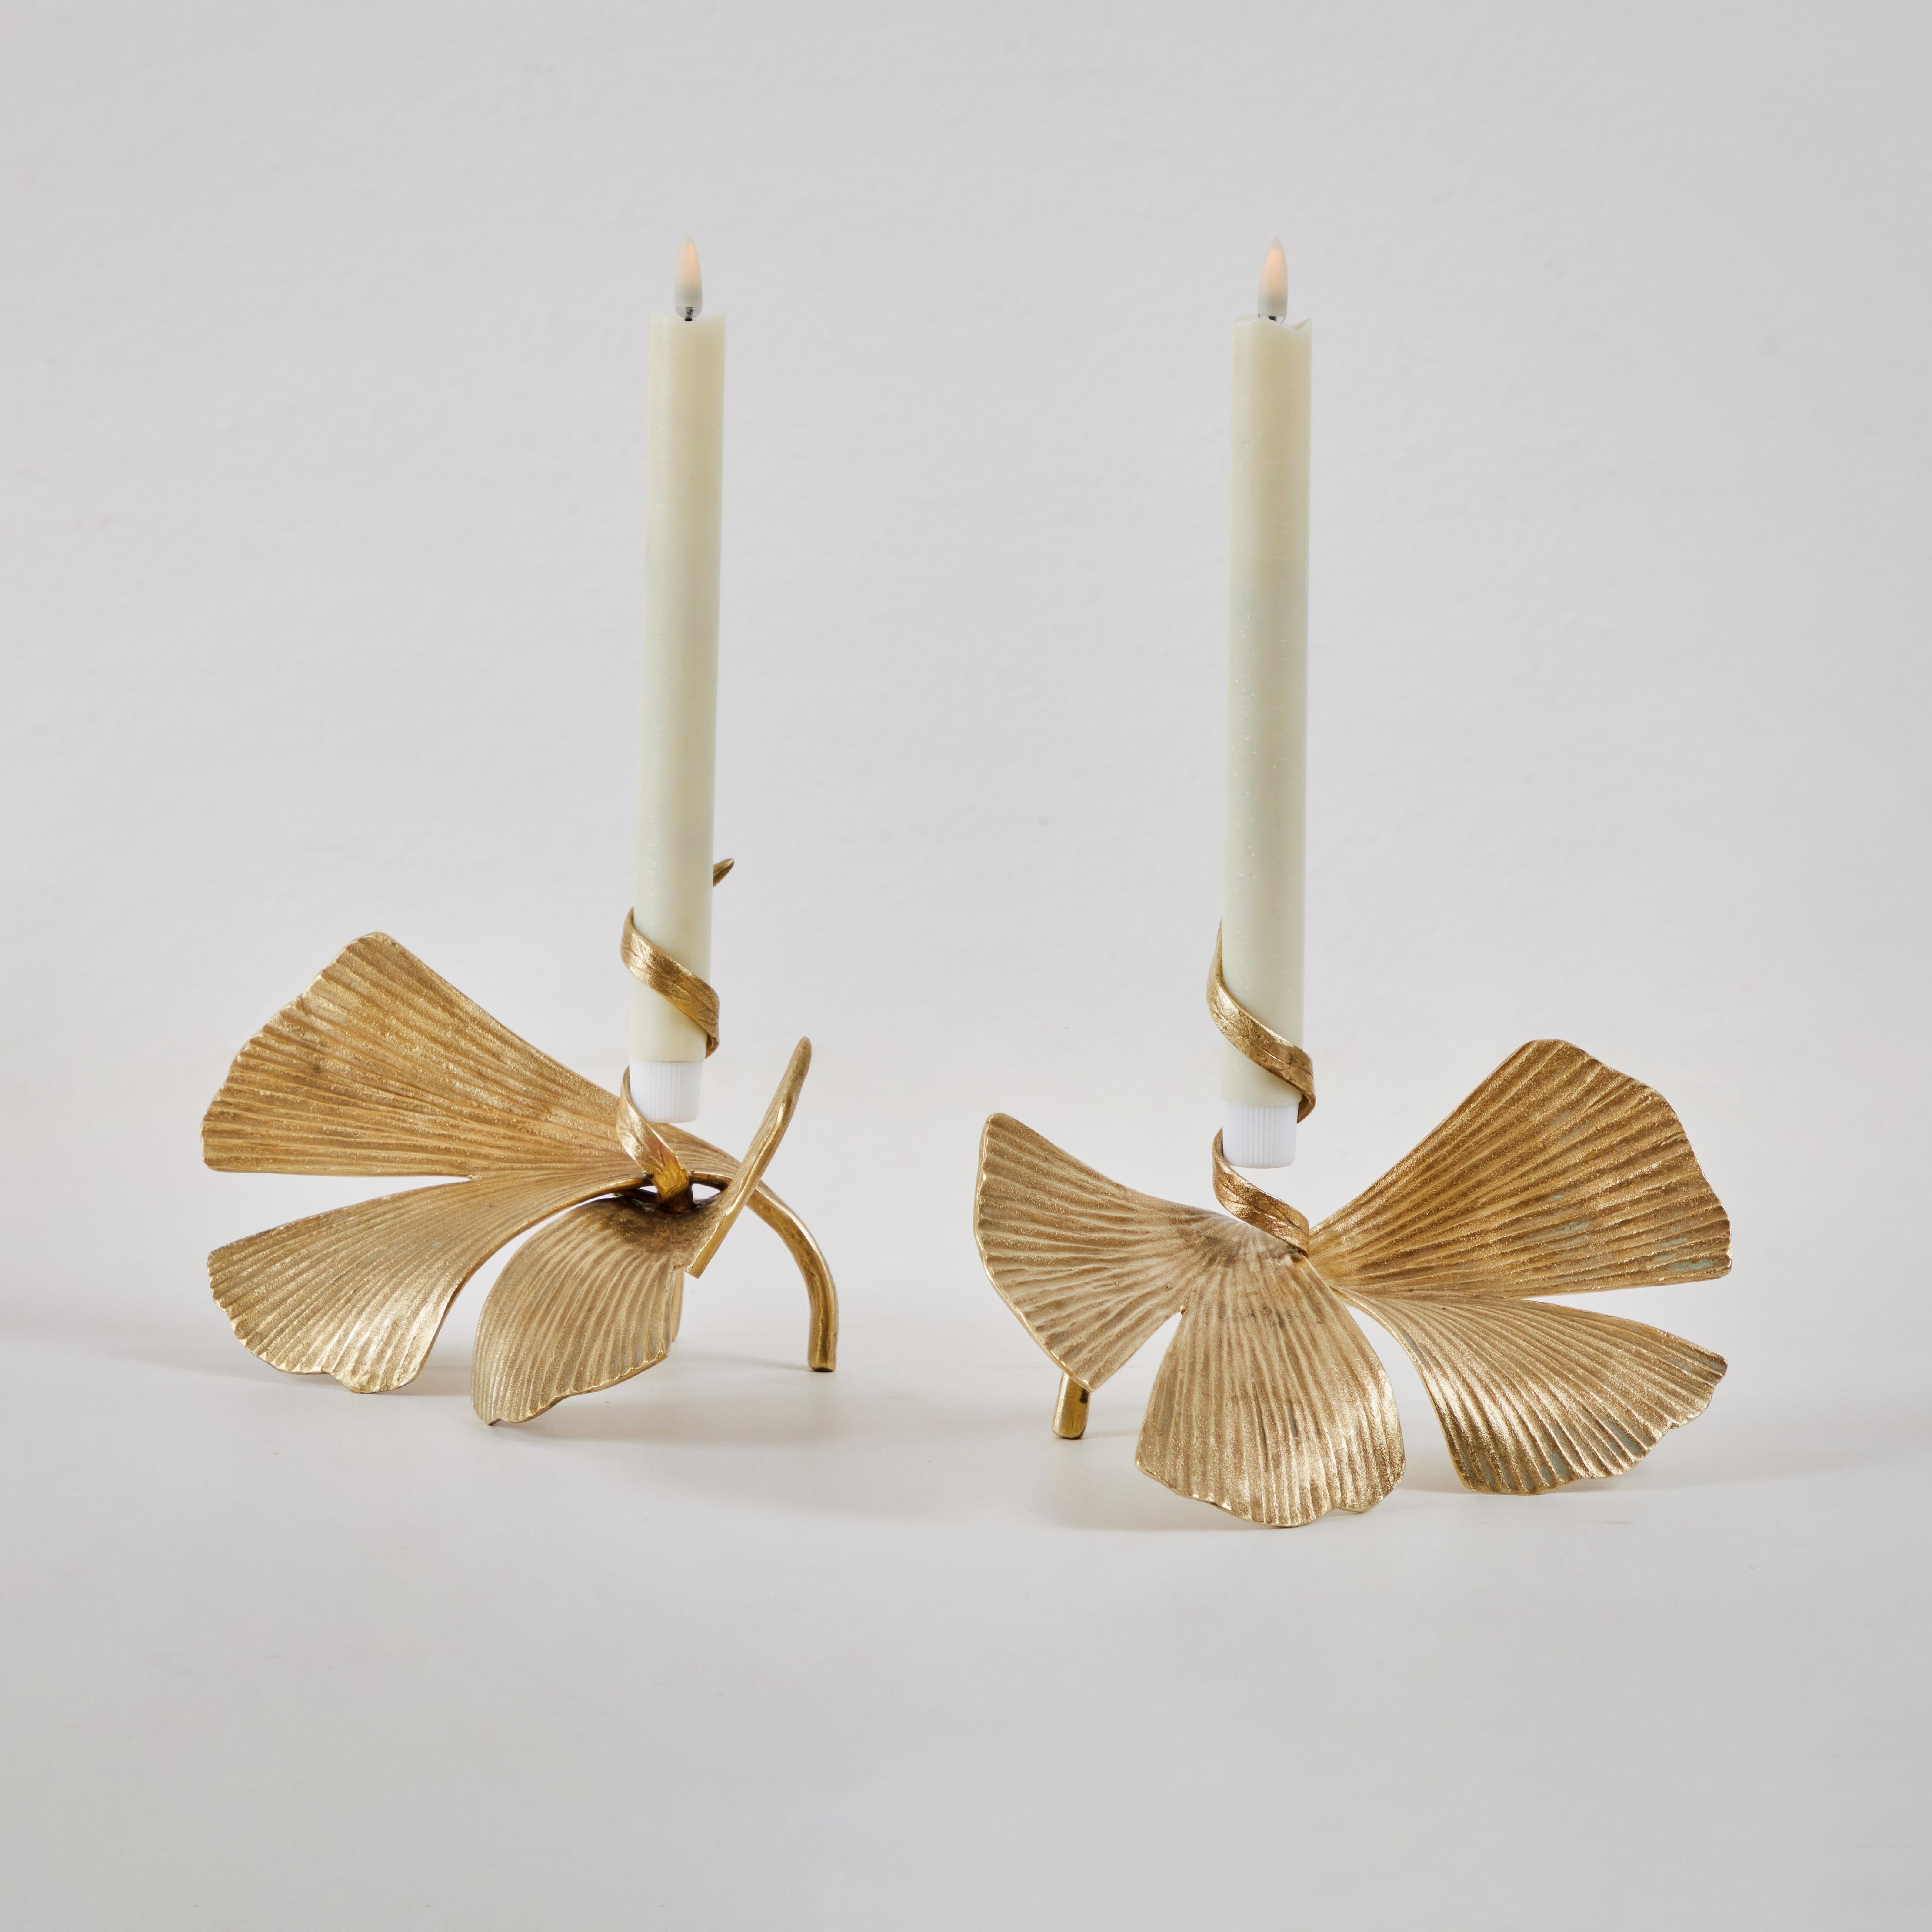 Art Nouveau Gingko Candlesticks by Mark Bankowsky  For Sale